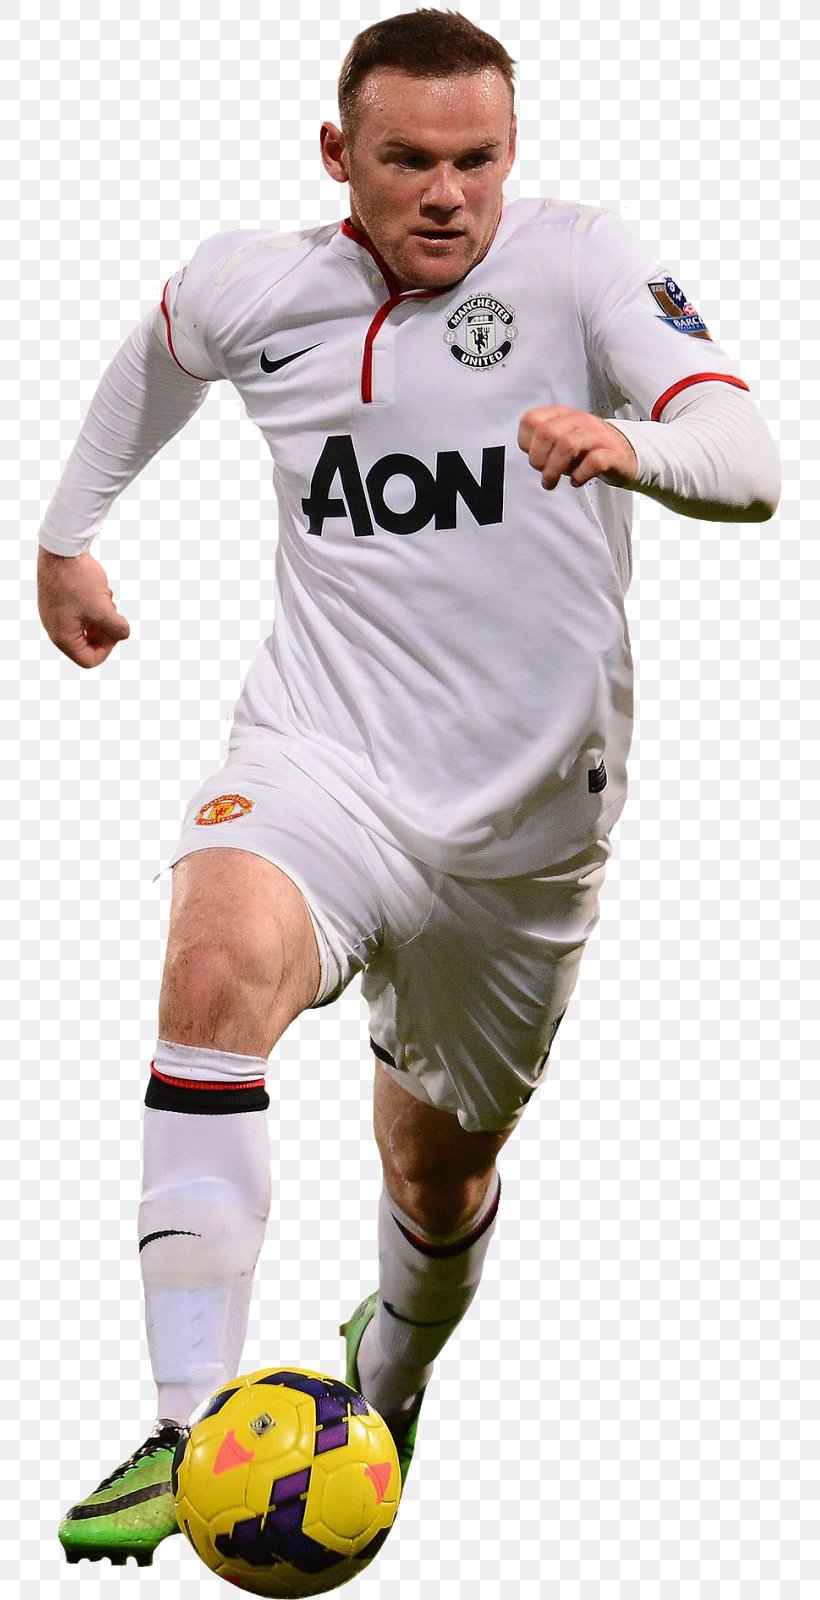 Wayne Rooney Football Player Shoe Outerwear, PNG, 769x1600px, Wayne Rooney, Ball, Email, Football, Football Player Download Free